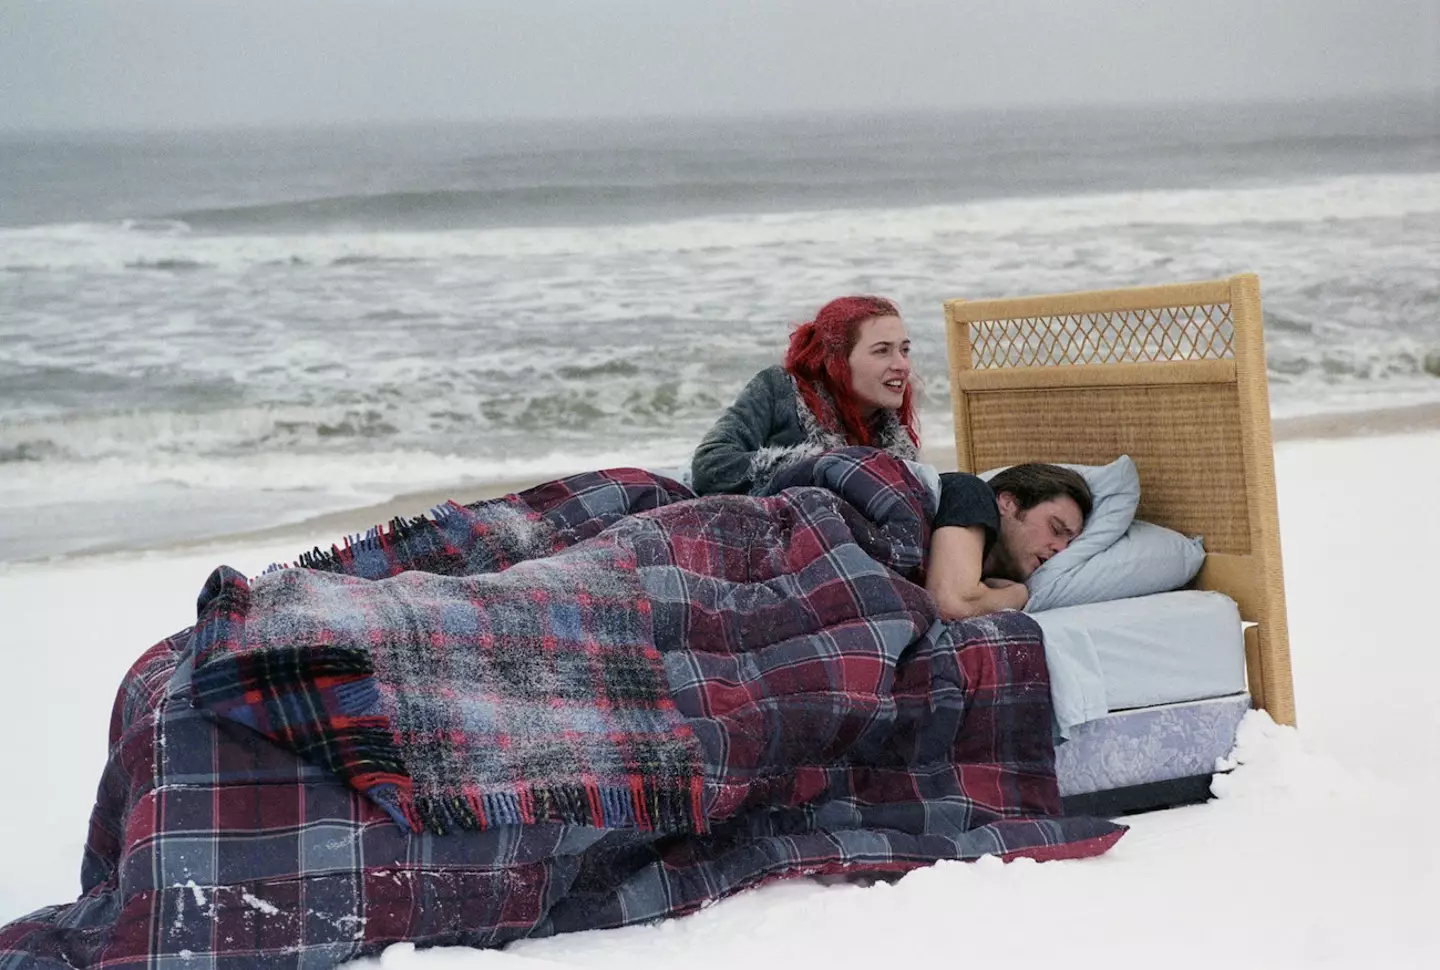 Jim Carrey starred in Eternal Sunshine of the Spotless Mind with Kate Winslet in 2004.